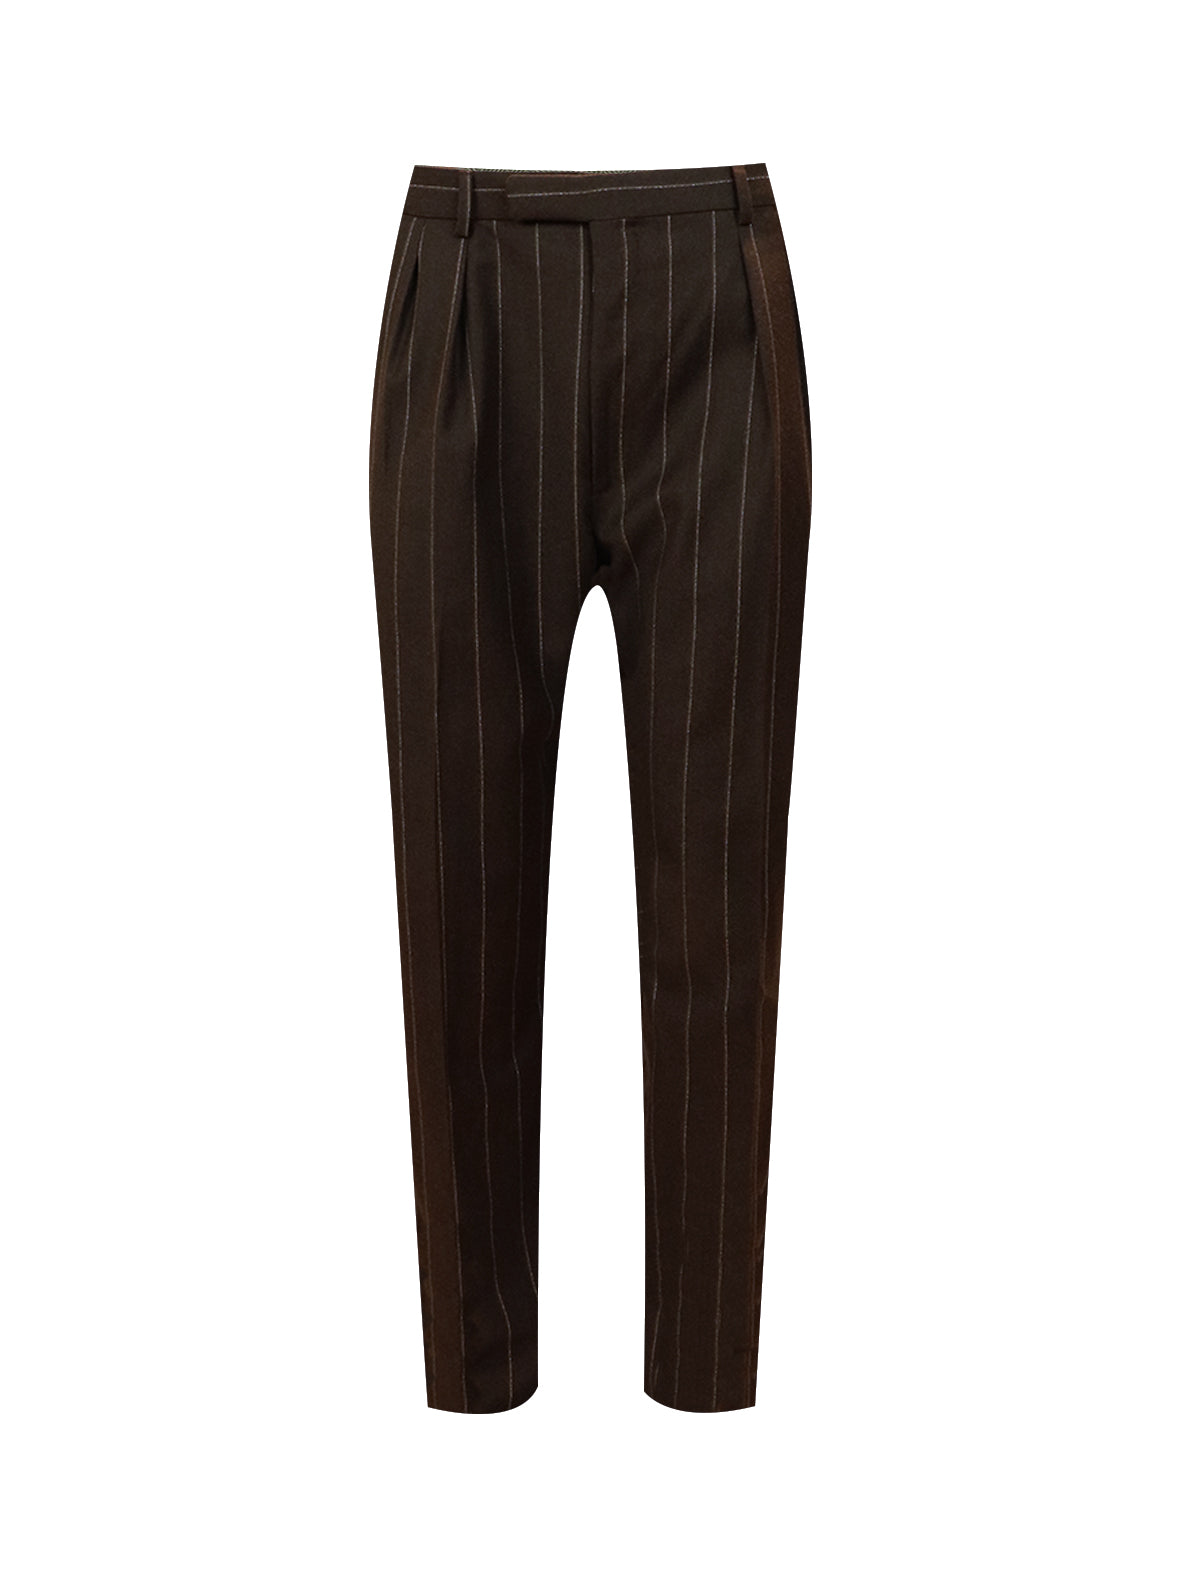 GABRIELE PASINI Tailored Pant in Brown & Silver Stripes